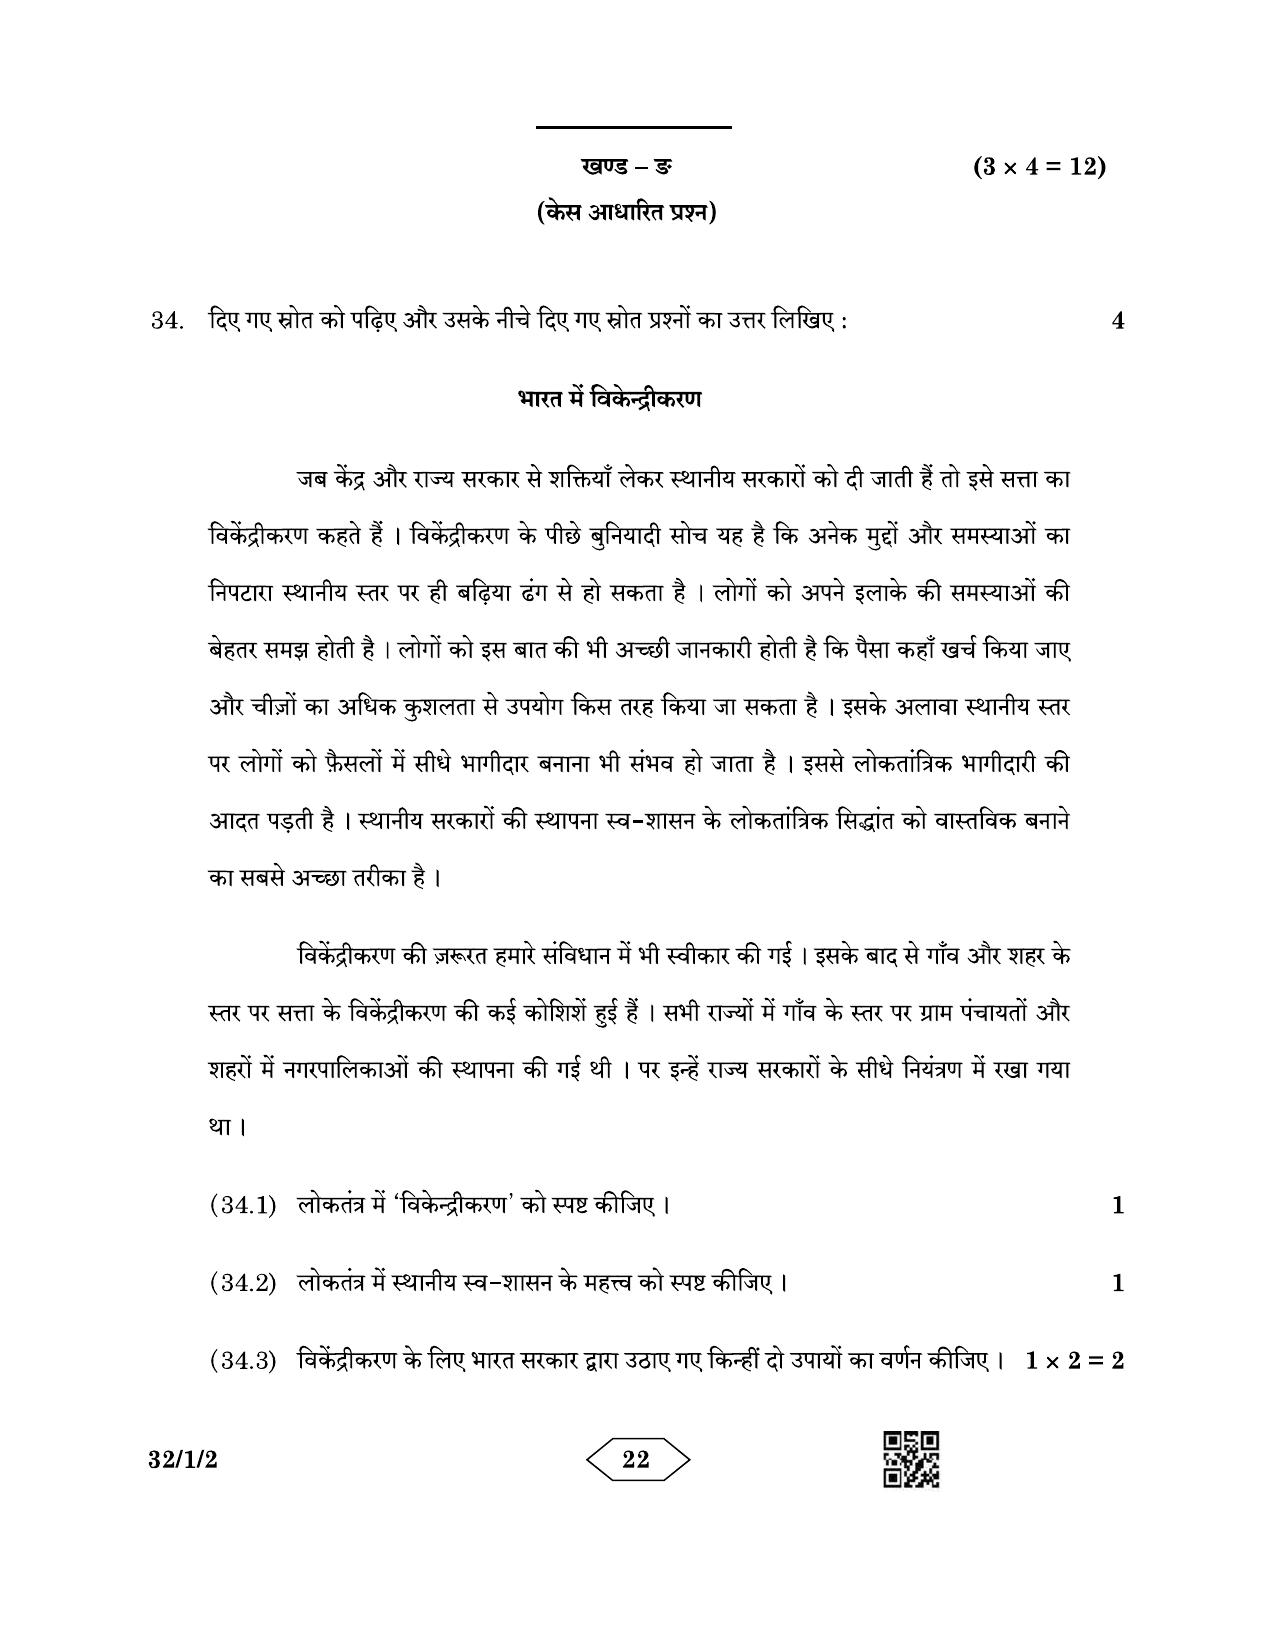 CBSE Class 10 32-1-2 Social Science 2023 Question Paper - Page 22